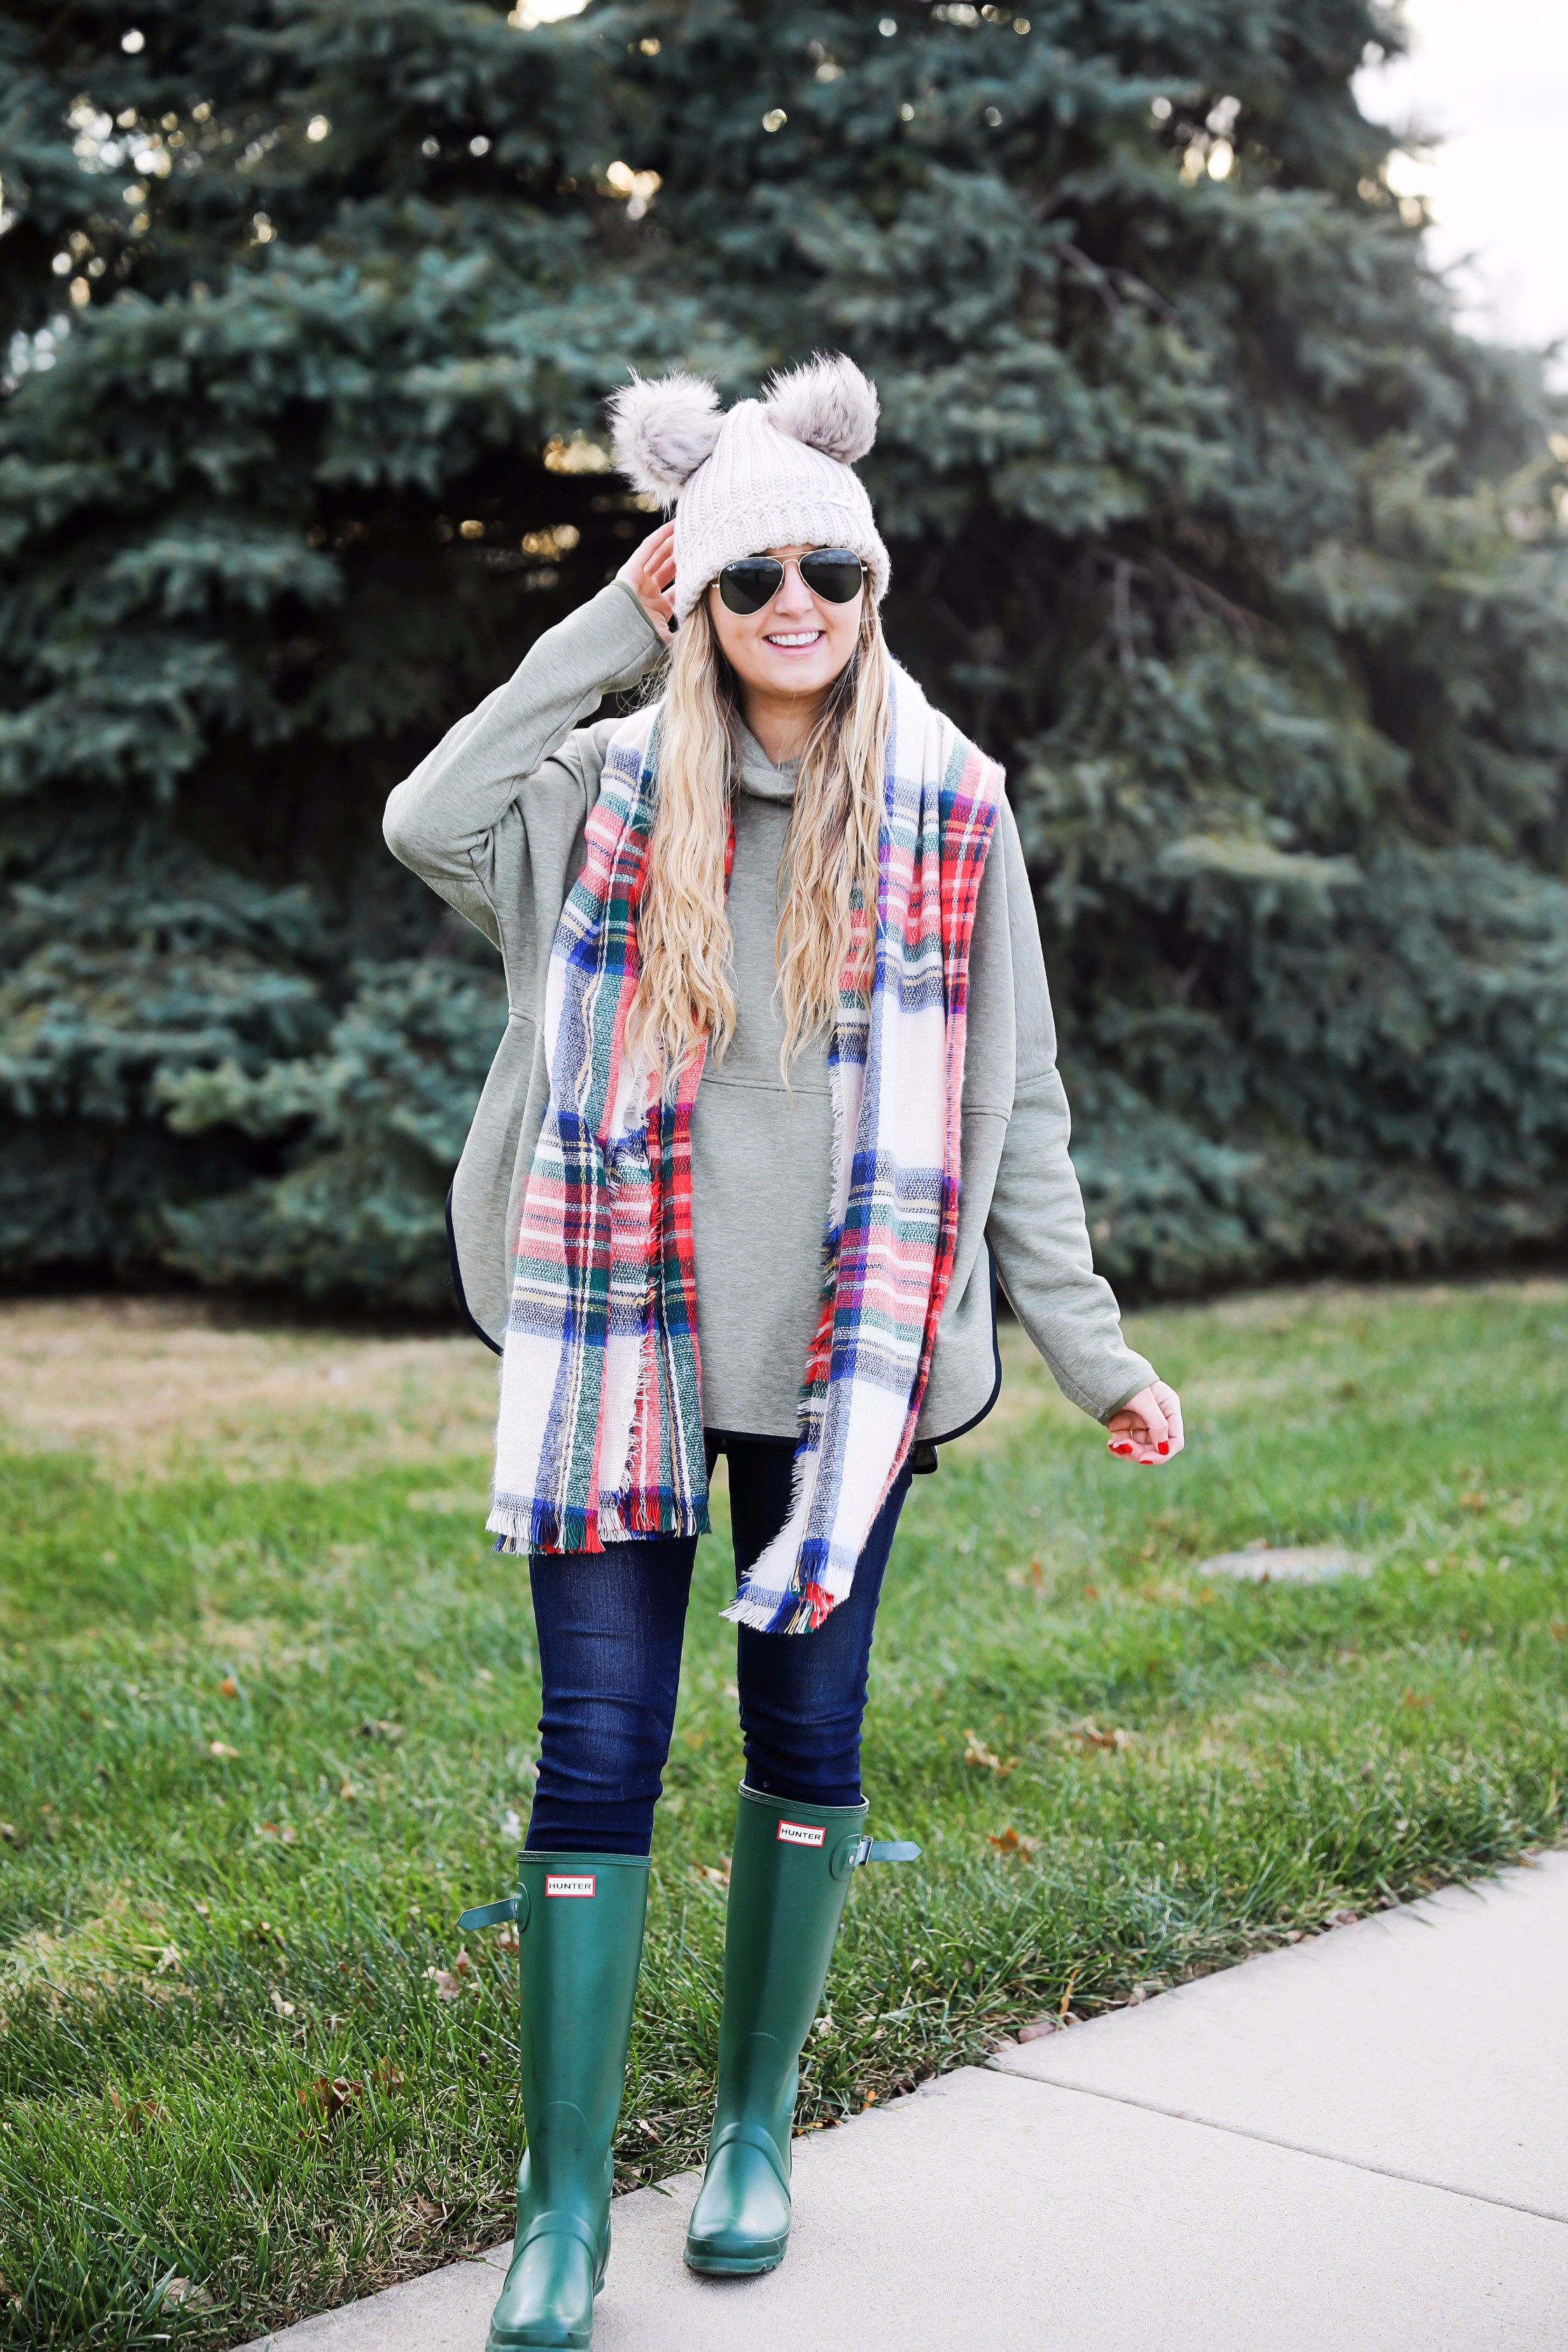 Christmas colored plaid scarf paired with my olive north face and faux fur ear beanie! Wearing my green hunter boots to make this look a casual holiday outfit! Details on daily dose of charm by lauren lindmark